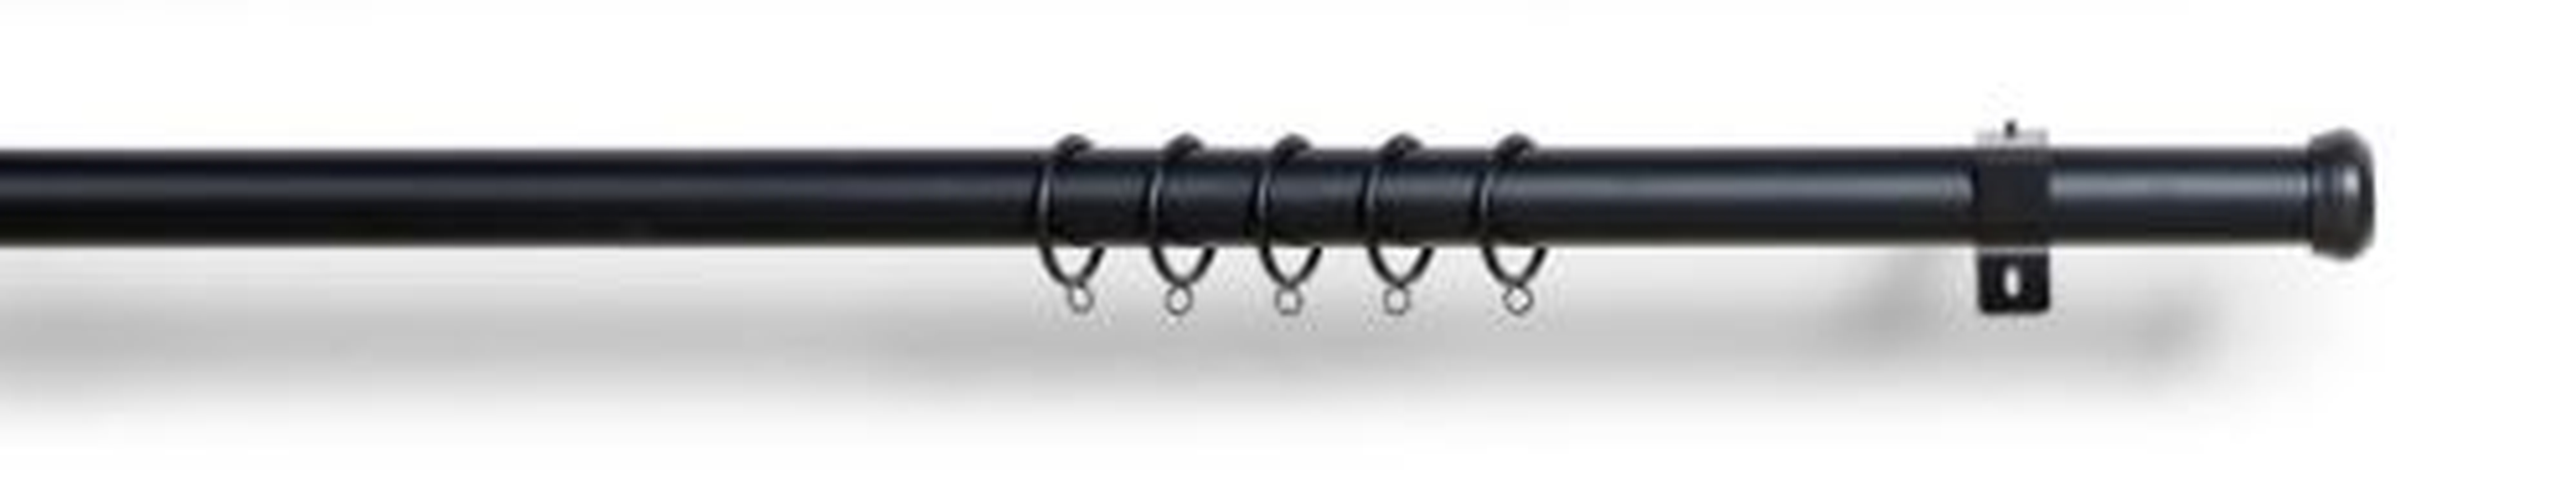 Black Adjustable Curtain Rod with Barrel Finial -36"-66" - With standard rings - Loom Decor